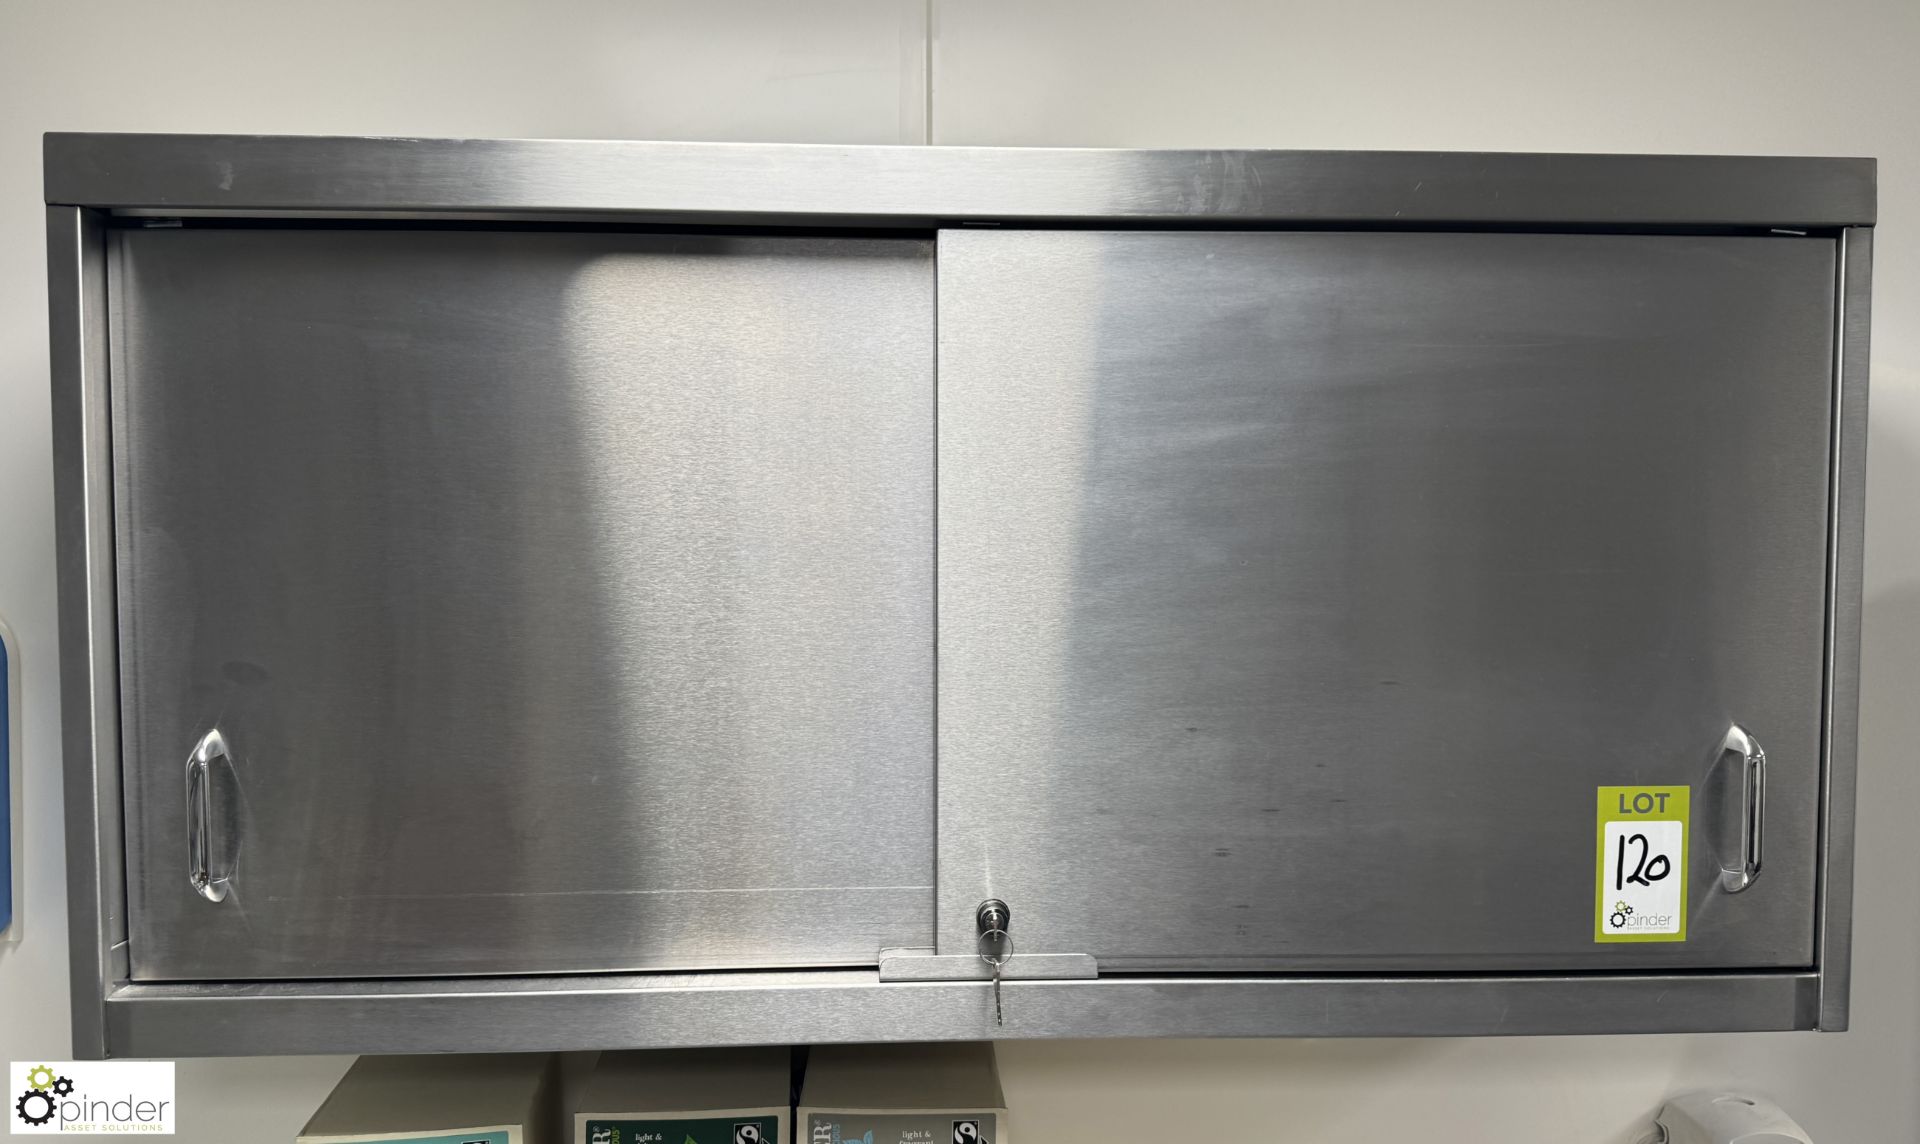 2 stainless steel wall mounted Cabinets, 1000mm x 300mm x 600mm (location in building - level 7) - Bild 2 aus 4